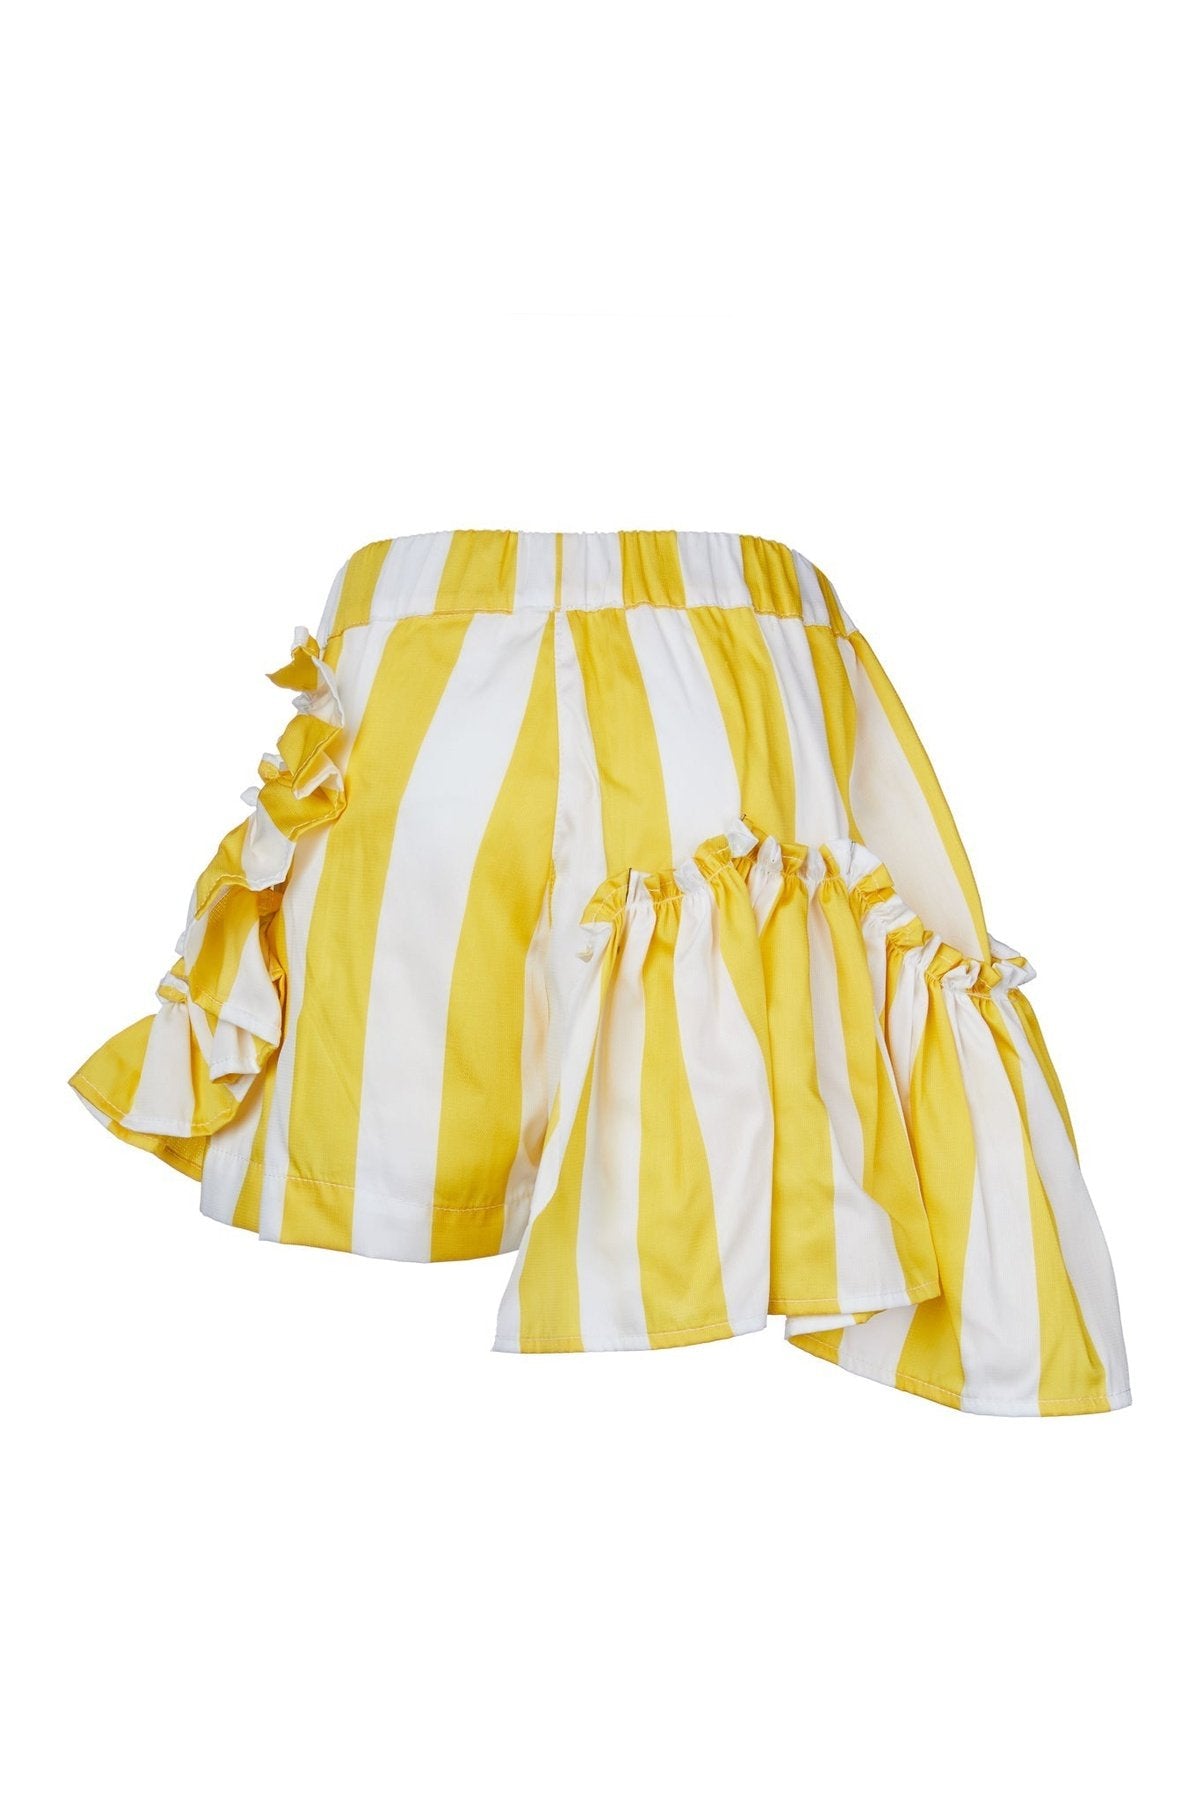 M'A KIDS FRILL SHORTS IN YELLOW AND WHITE